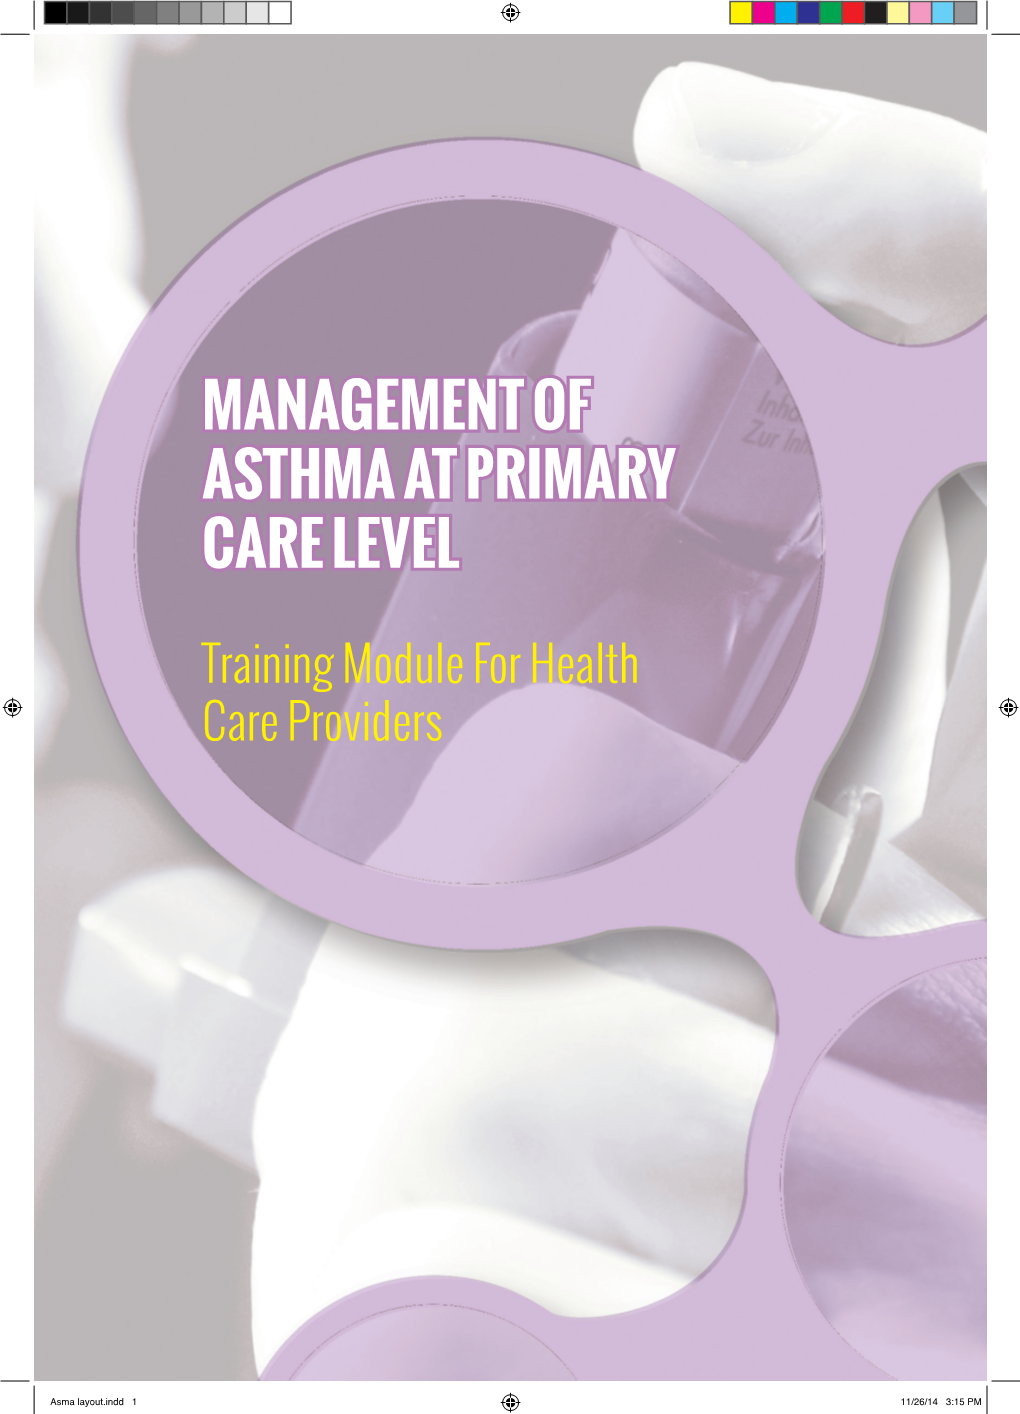 Management of Asthma at Primary Care Level